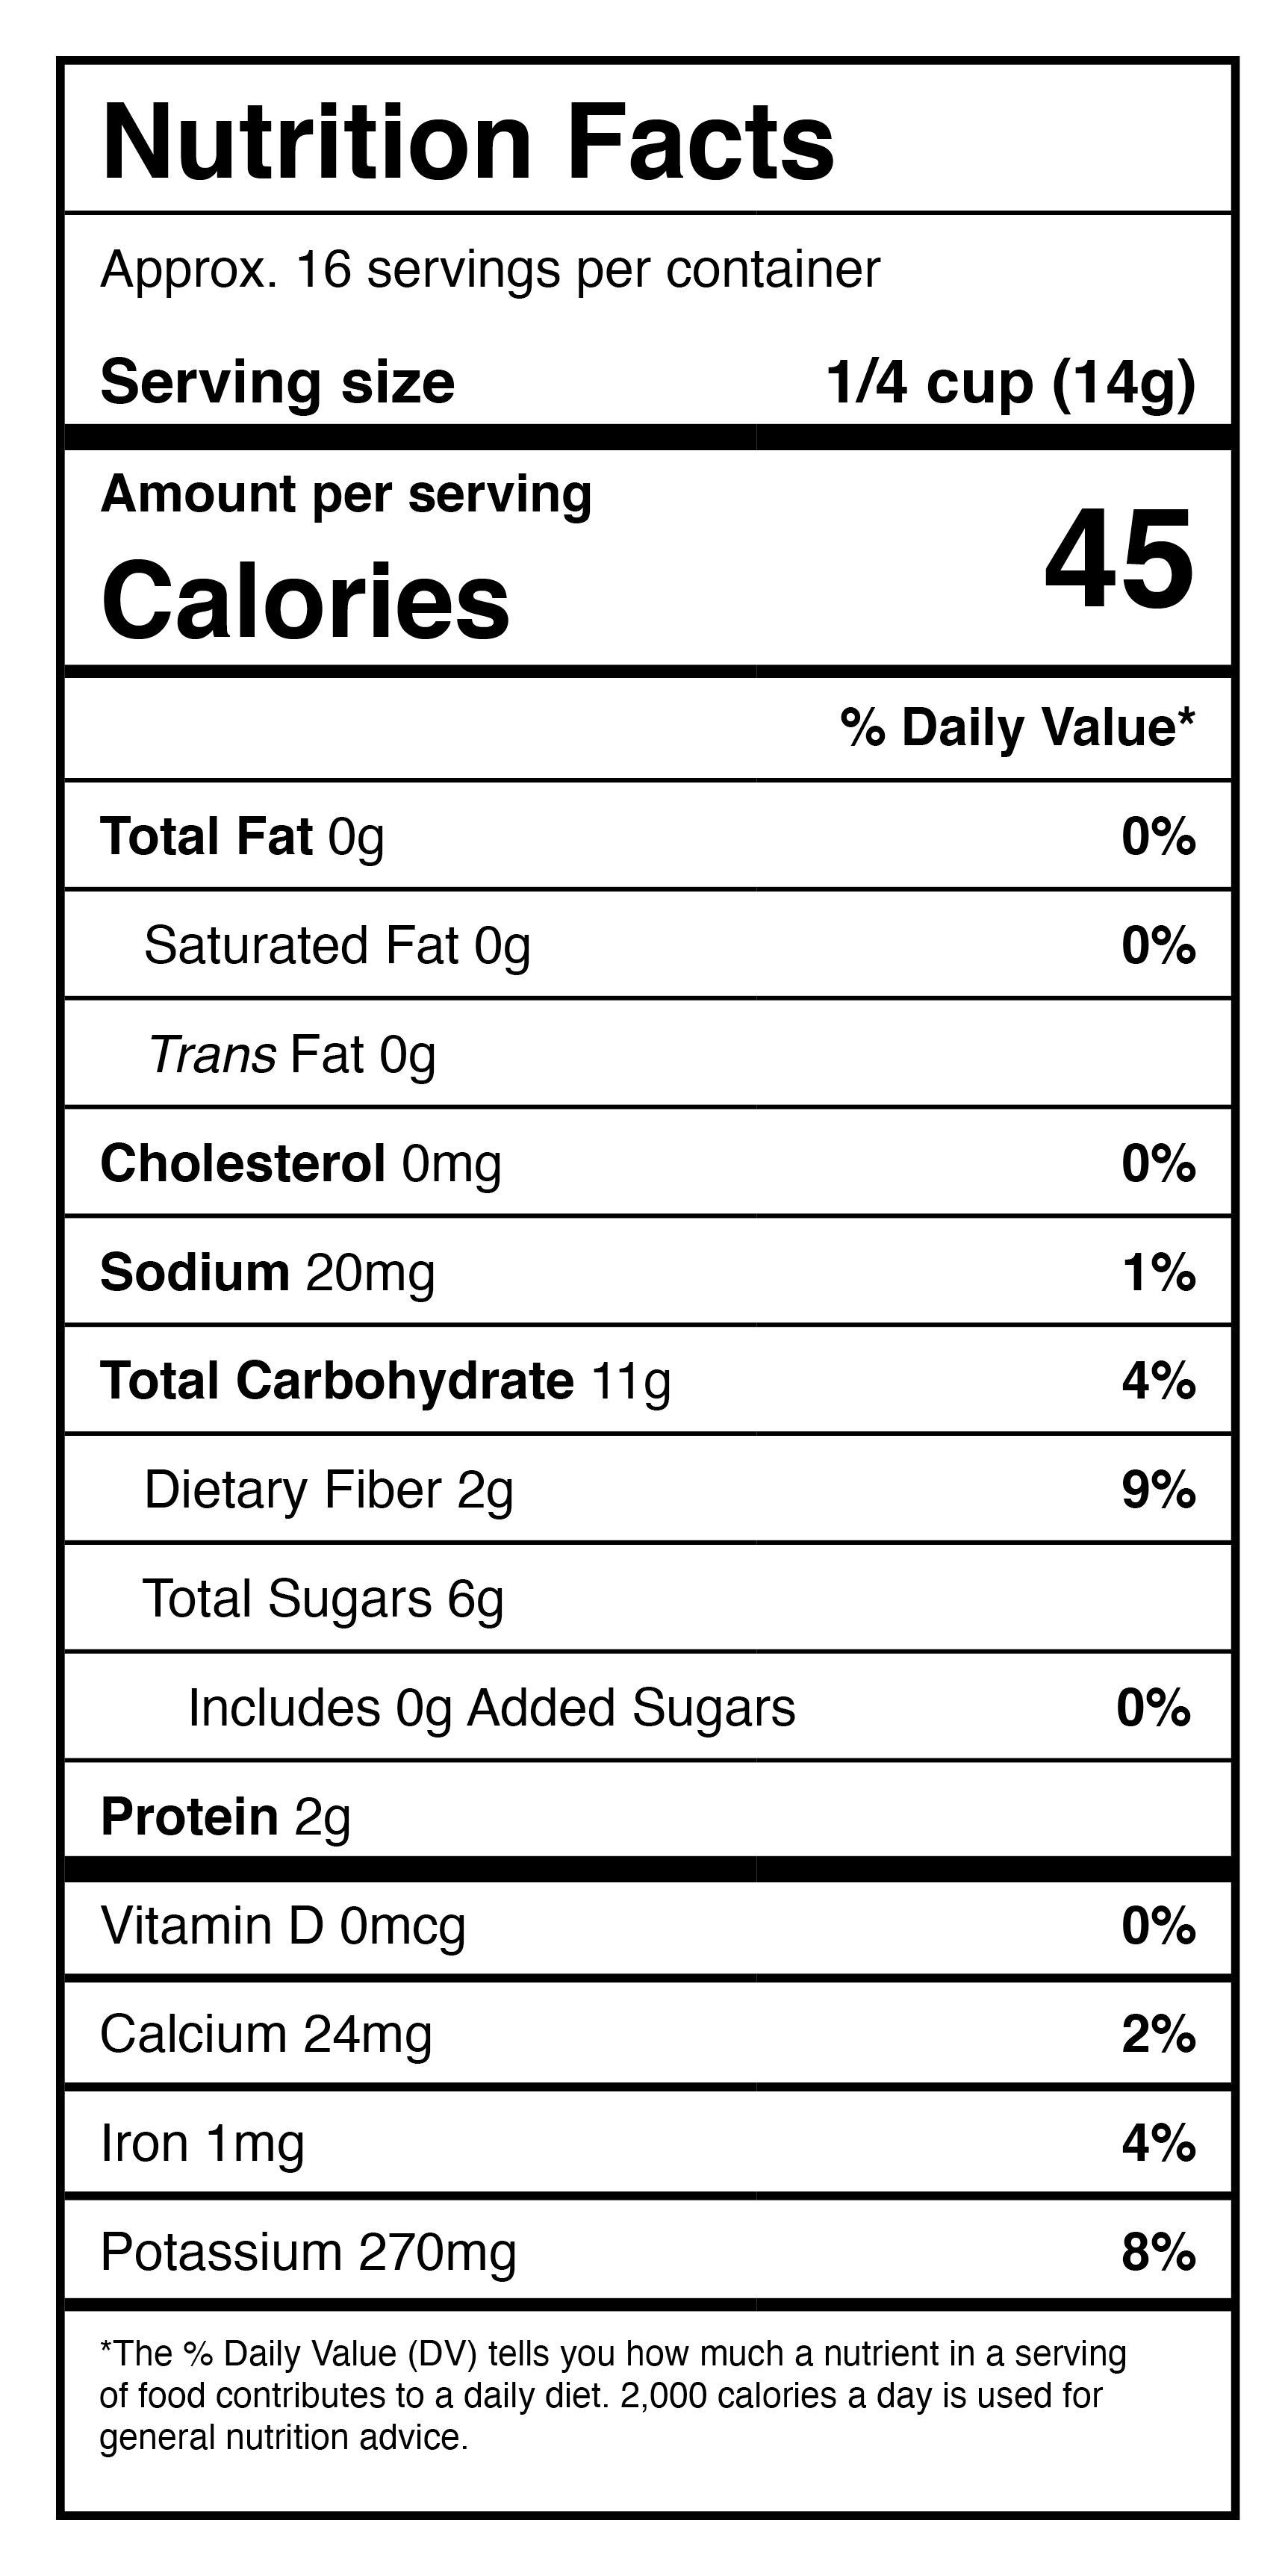 A nutrition label showing the nutrition facts of Harmony House Dried Tomato Dices (8 oz) - (SHIPS IN 1-2 WEEKS).